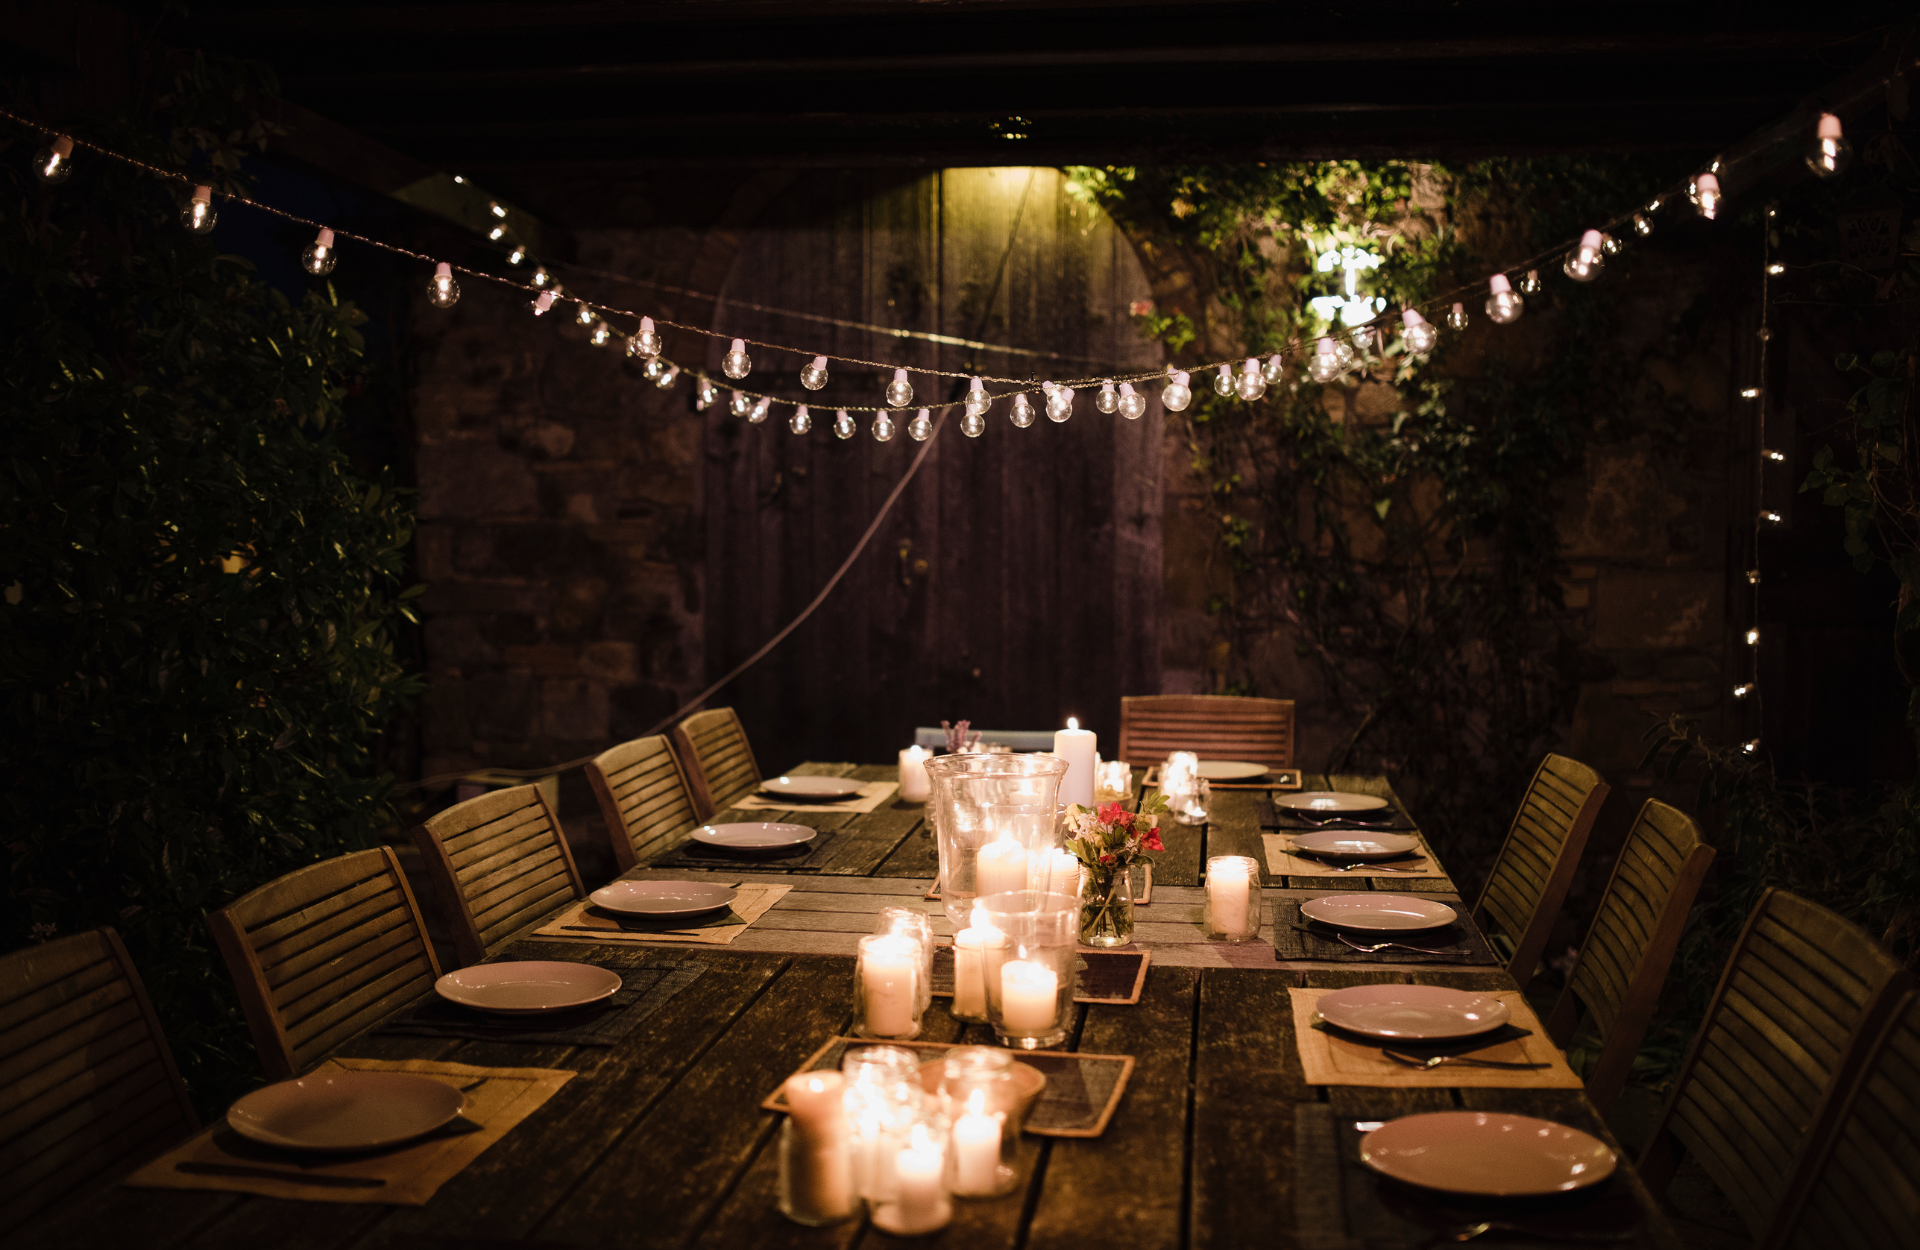 Garden table with candles and hanging lights